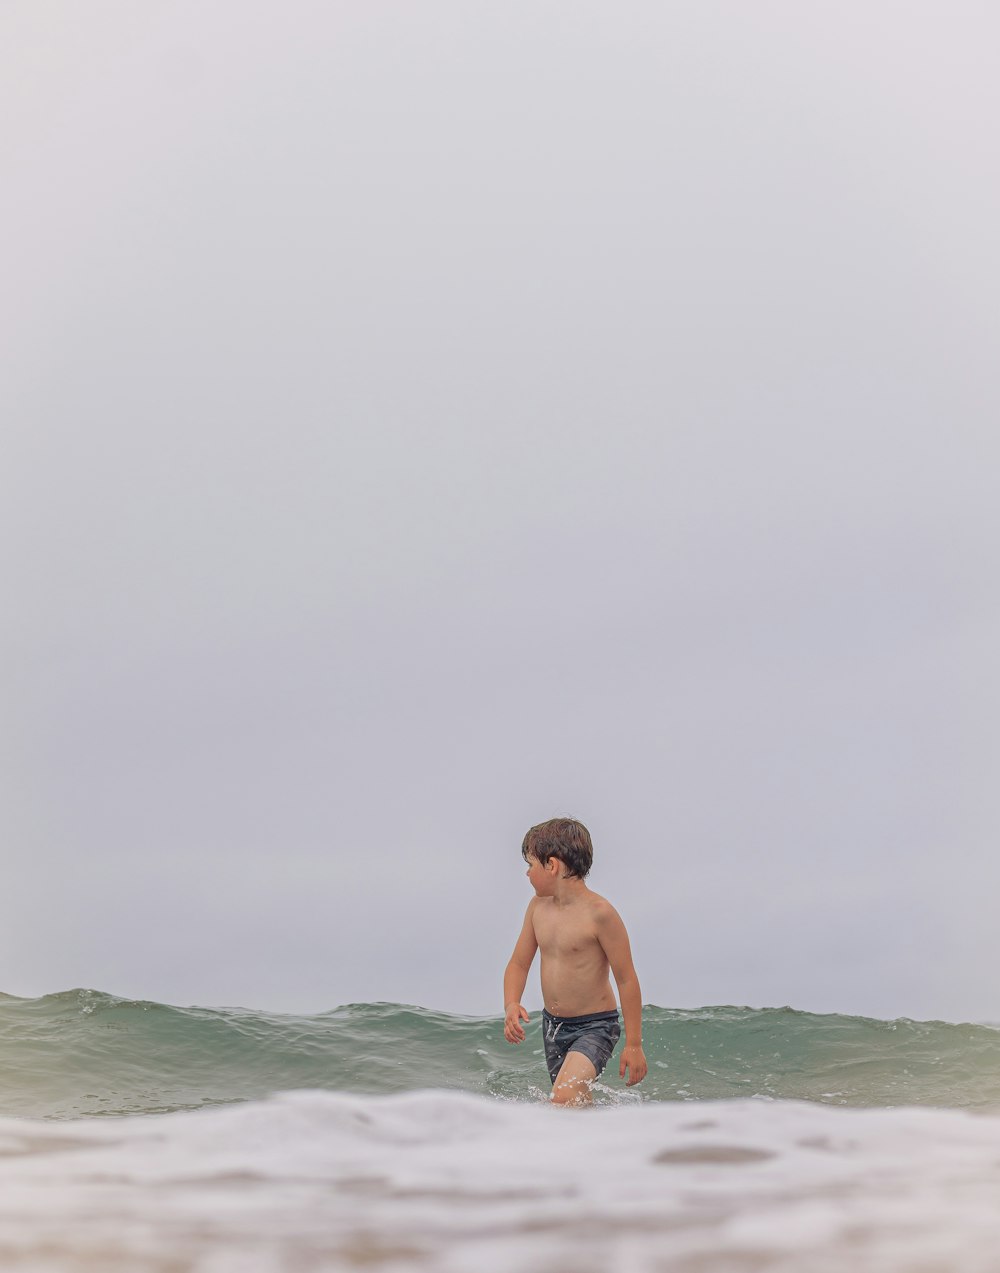 a young boy standing on a surfboard in the ocean